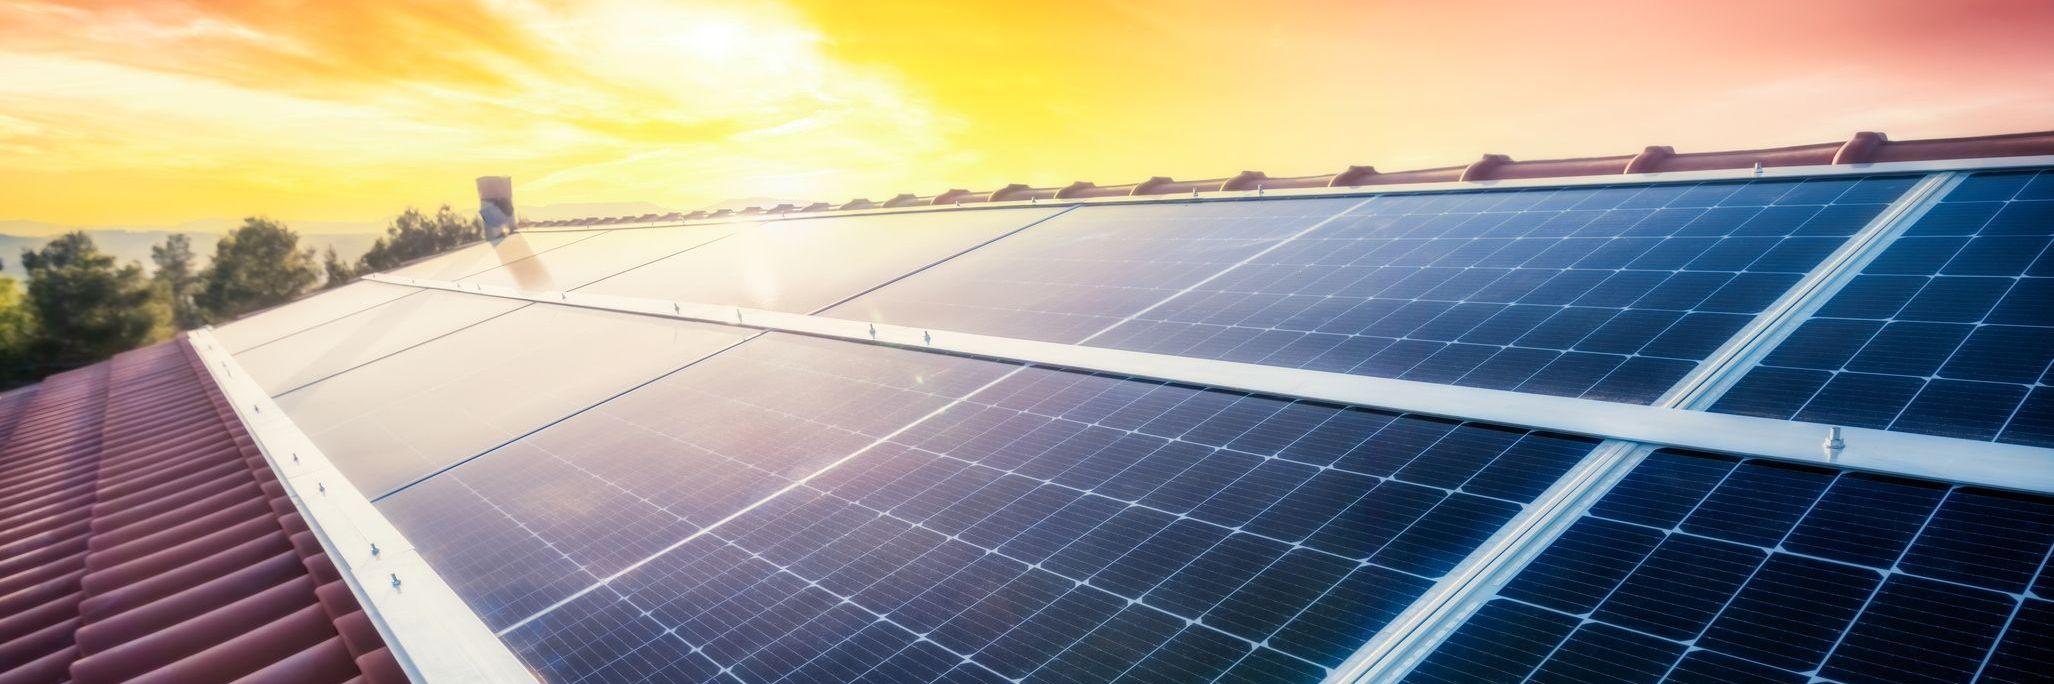 Solar Panels on Commercial Rooftops - The Key Issues for Development